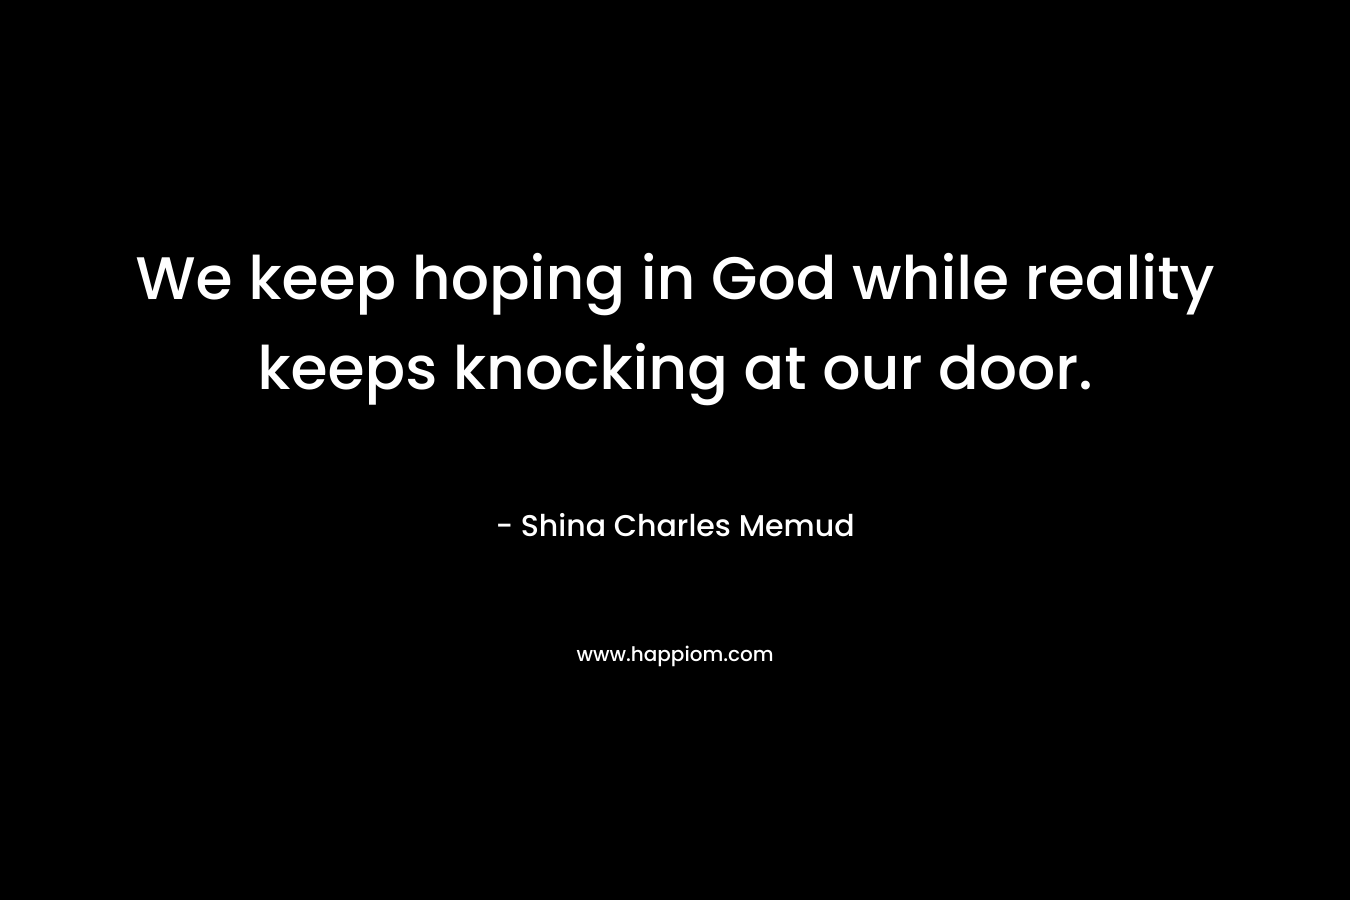 We keep hoping in God while reality keeps knocking at our door.